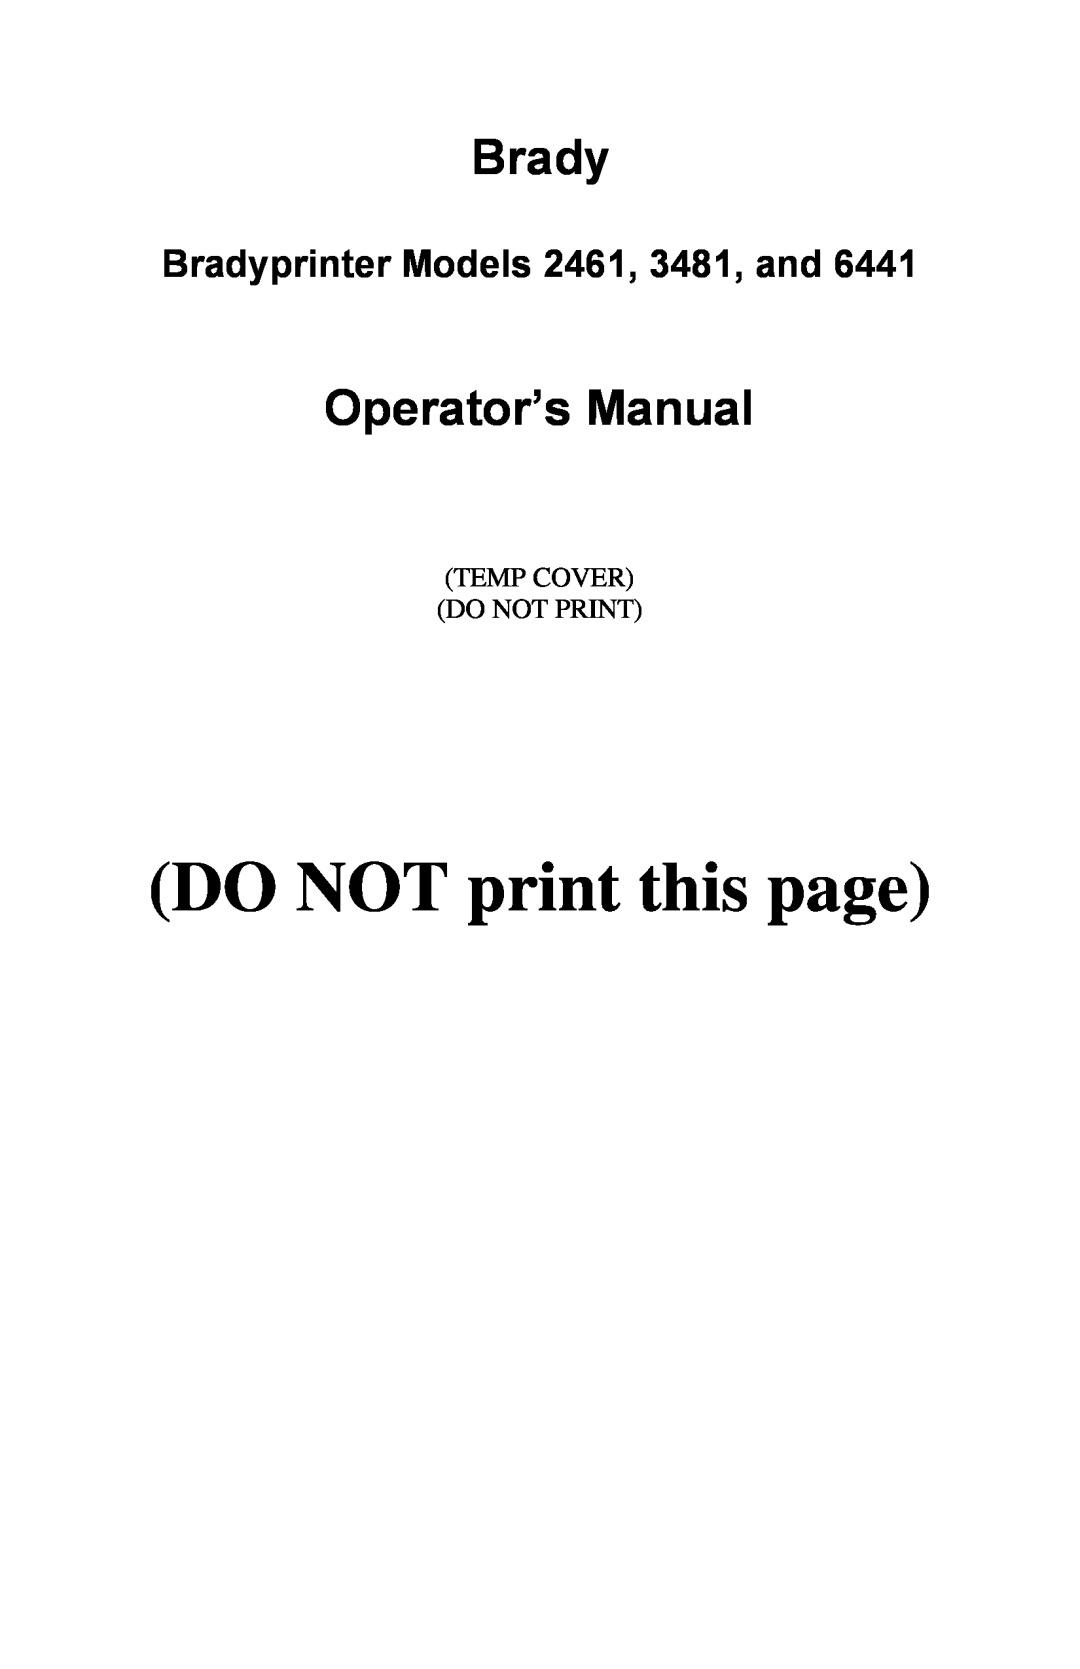 Brady 6441 manual DO NOT print this page, Bradyprinter Models 2461, 3481, and, Operator’s Manual 